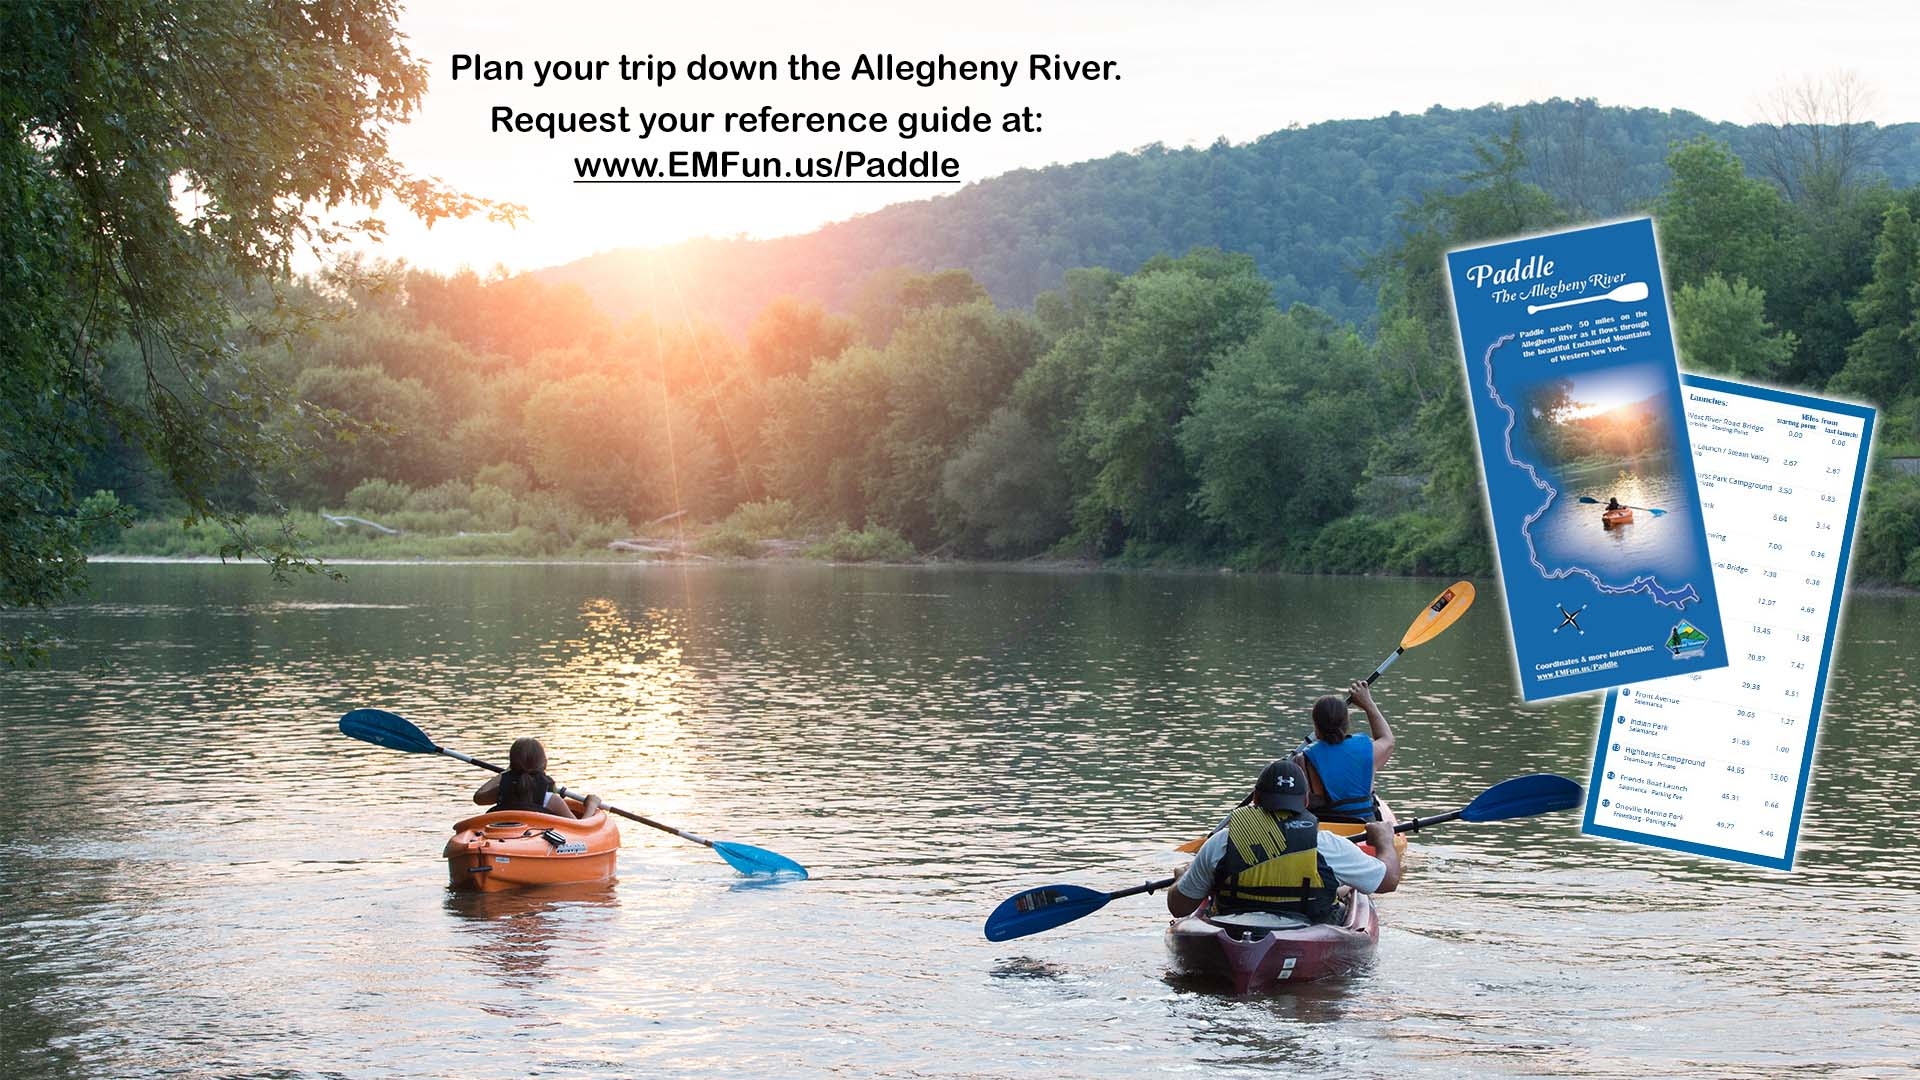 Paddle the Allegheny River EMFun.us/Paddle